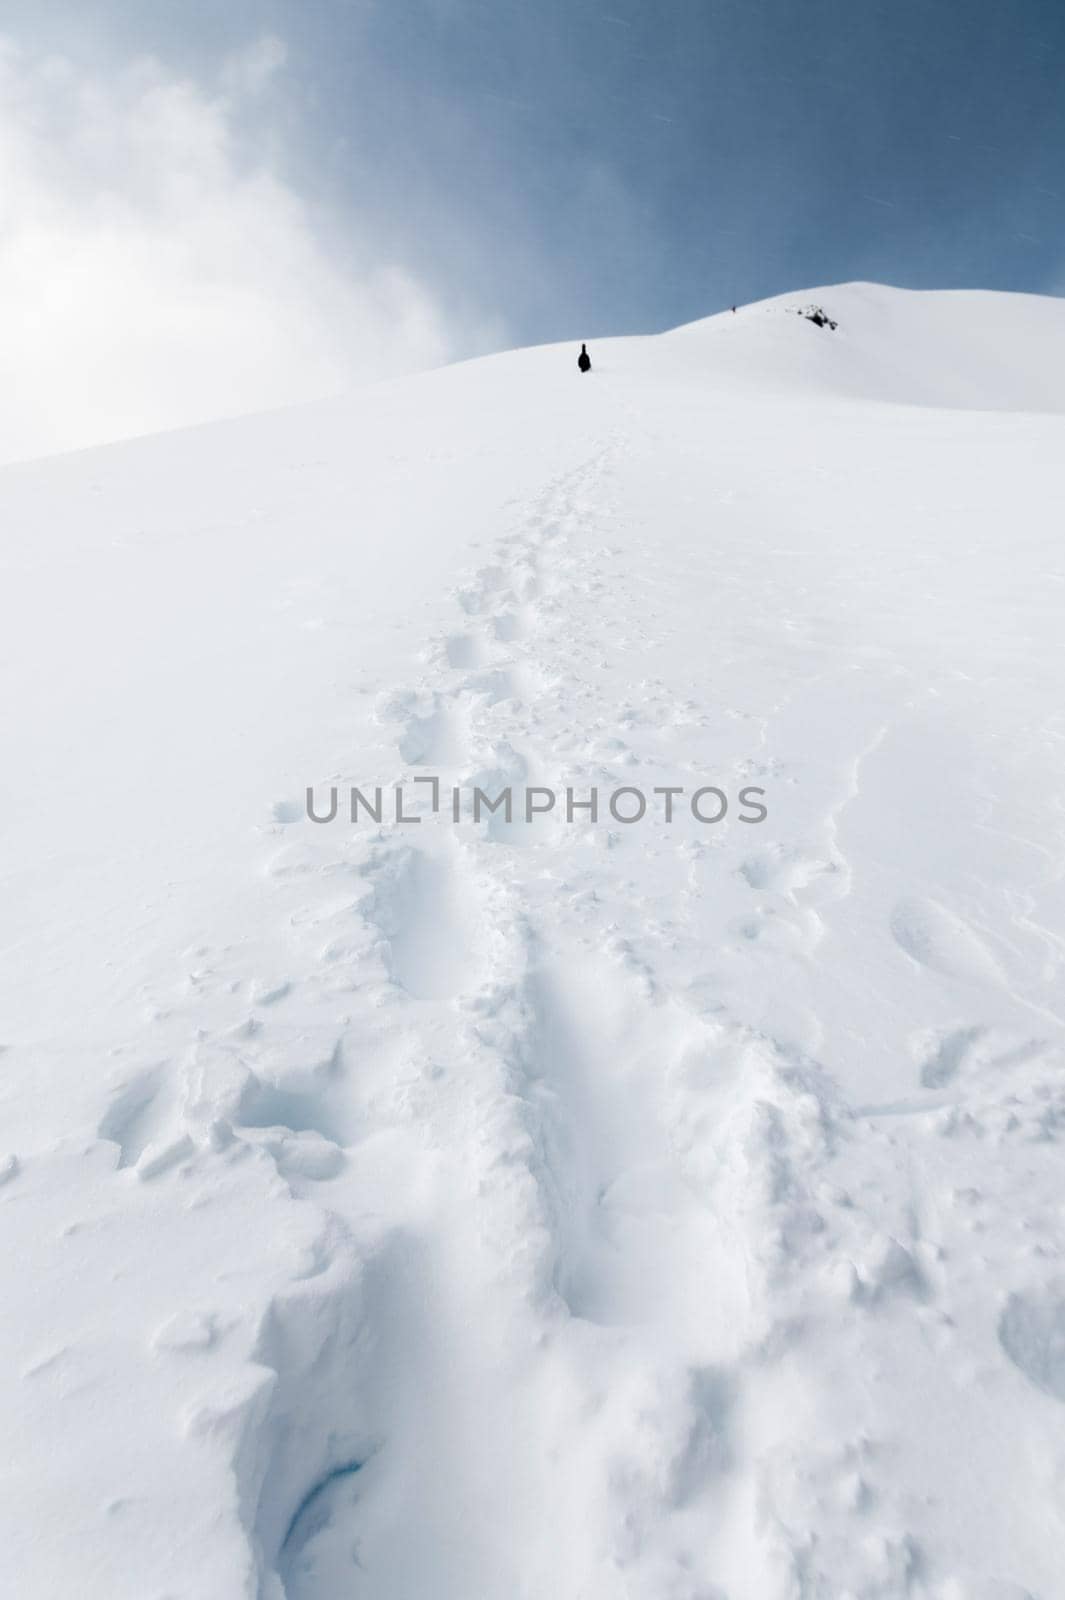 Single footprint from a man in deep snow, mountains, expedition concept by yanik88